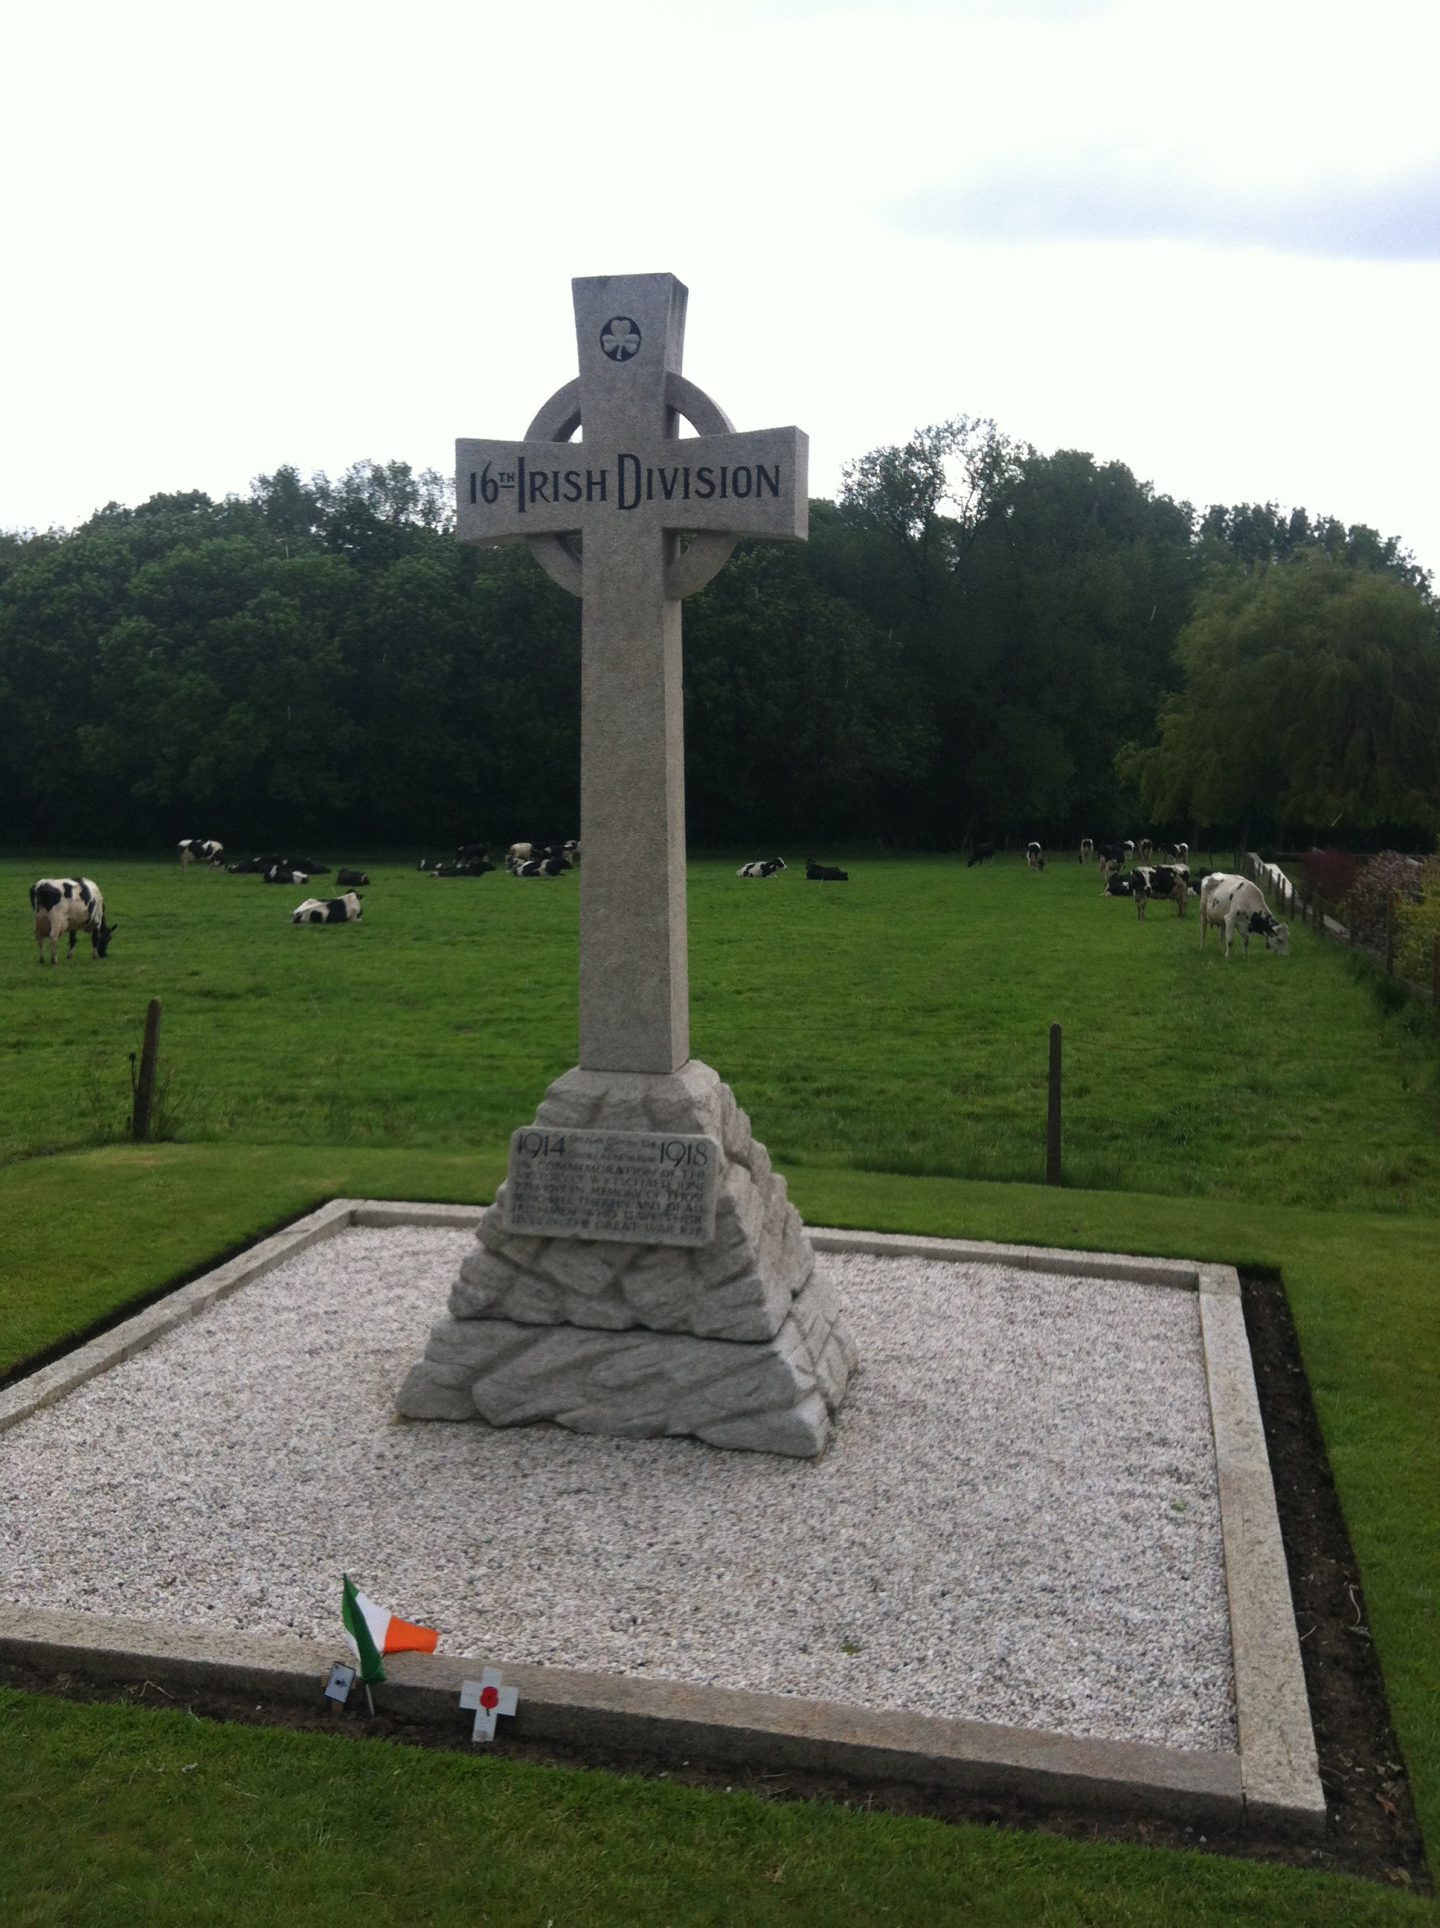 Travel Edits | A Tour of Irish WWI Sites in Flanders